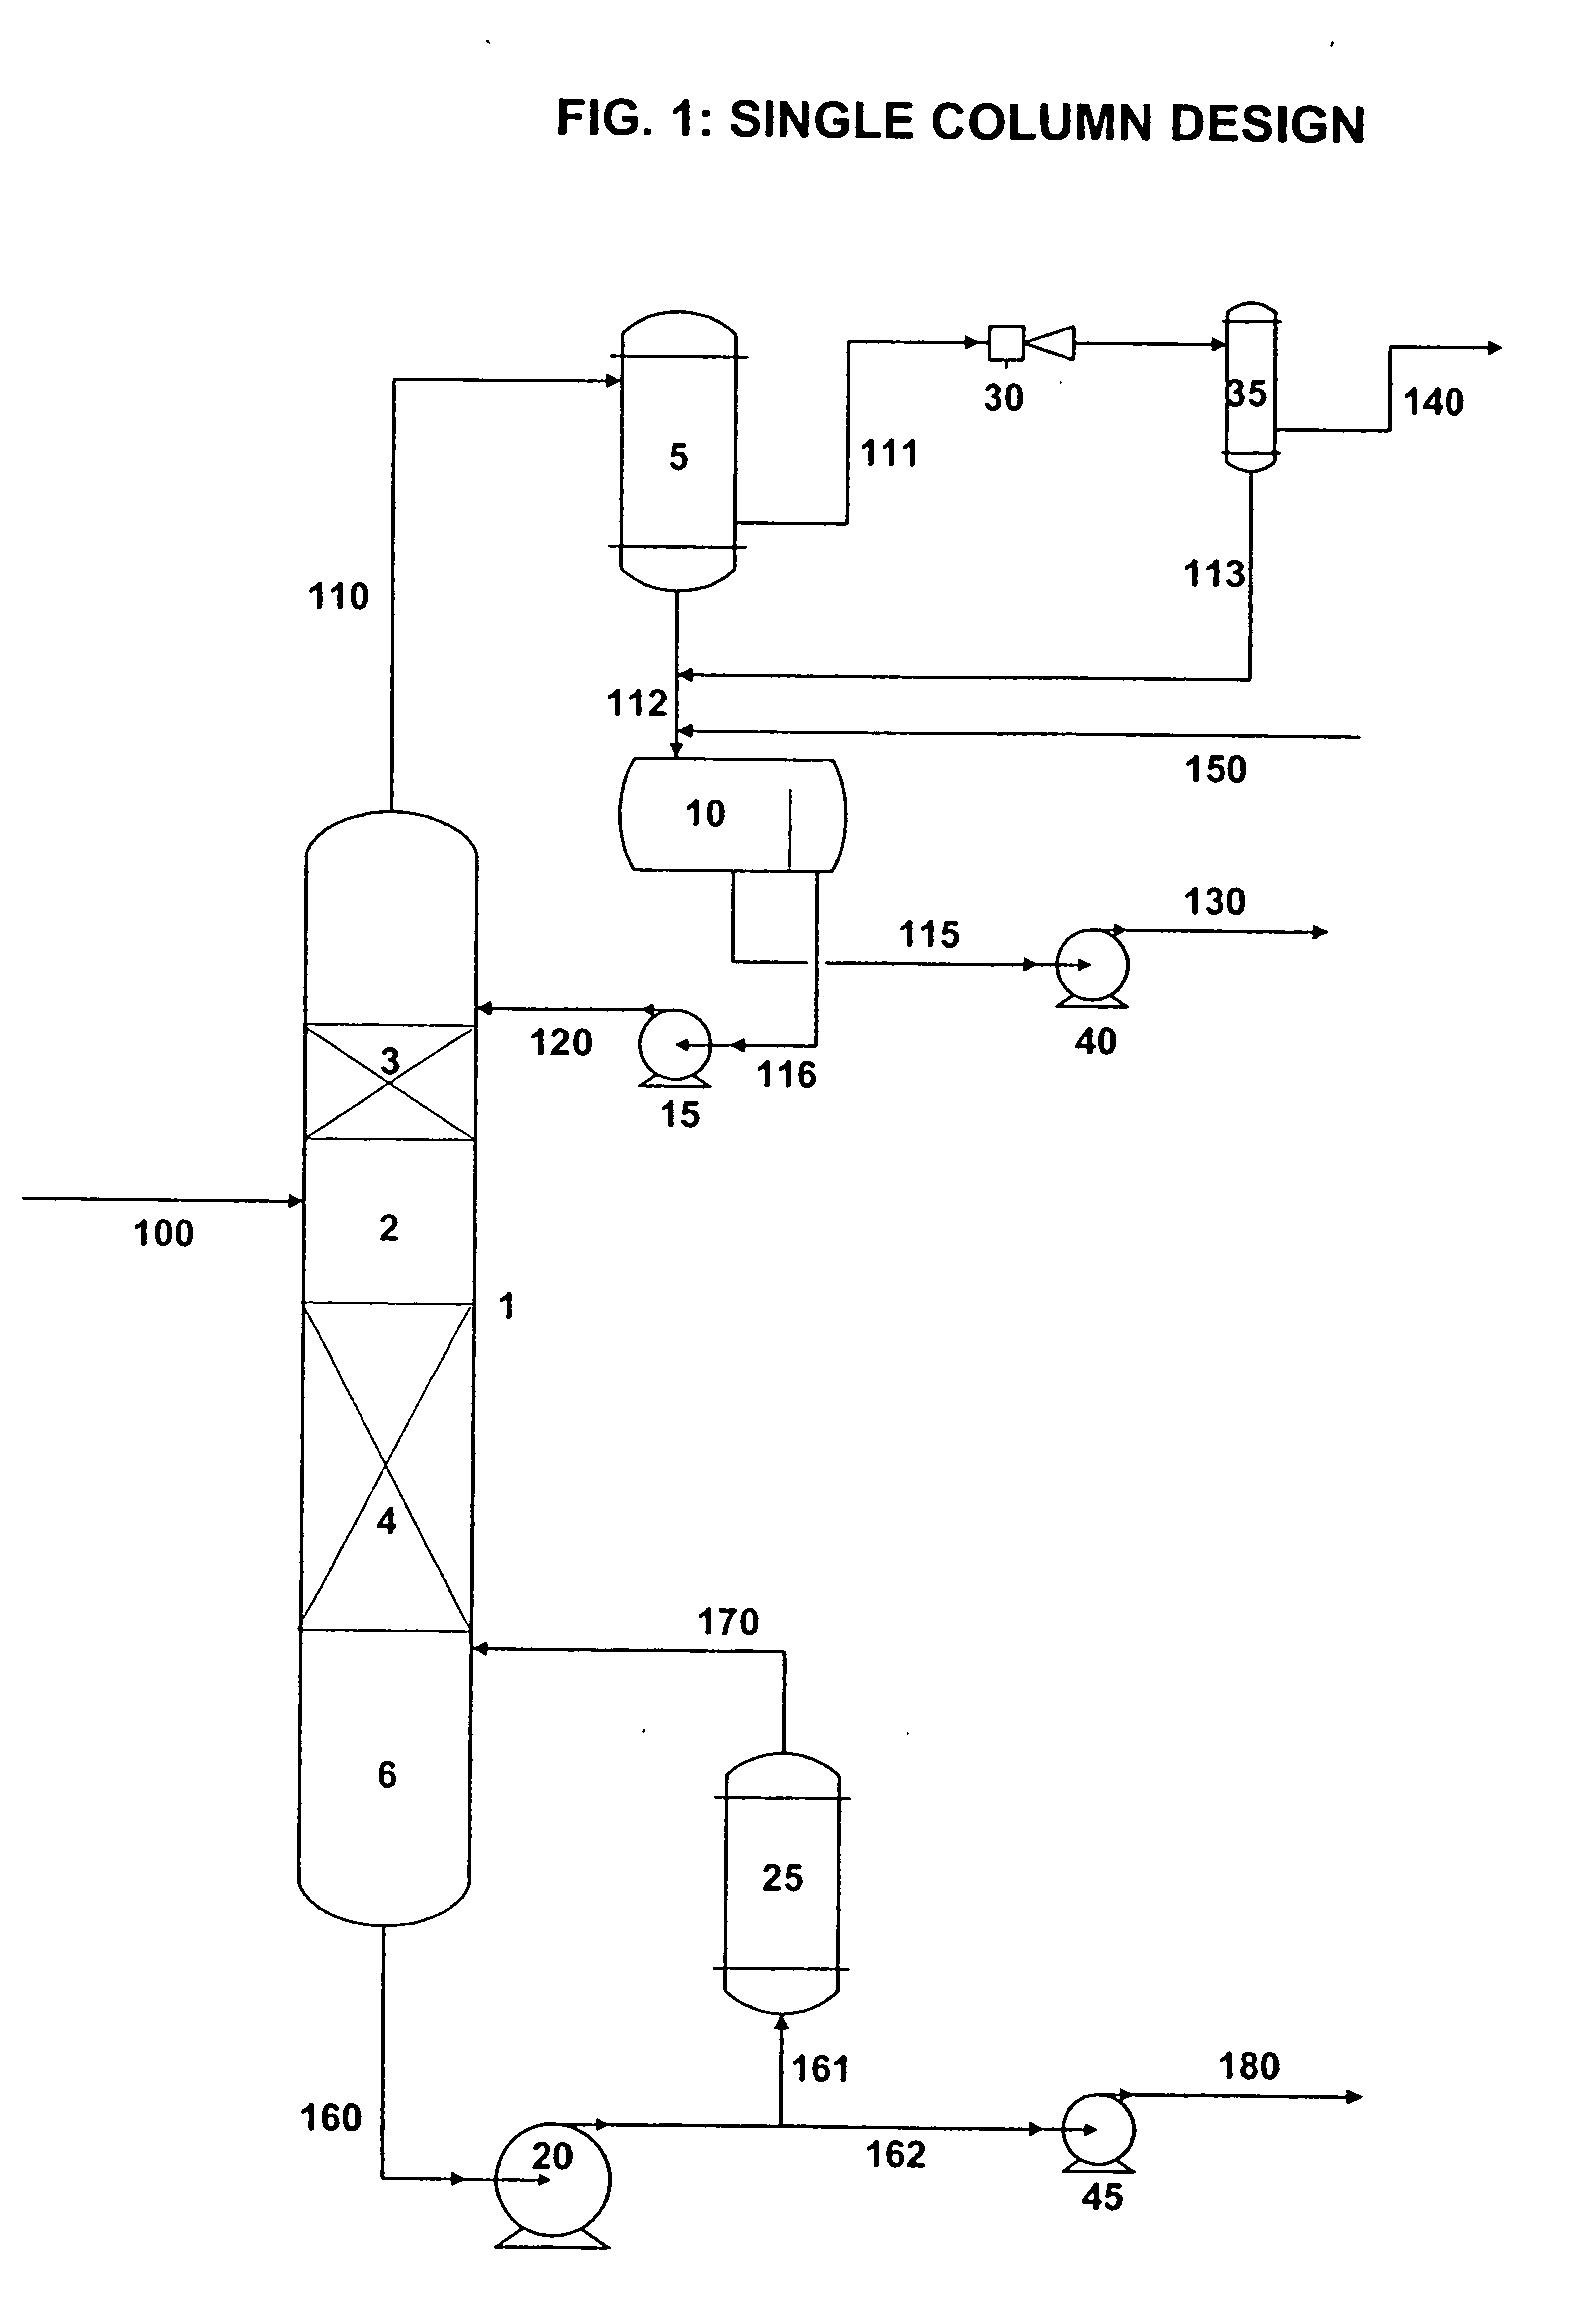 High capacity purification of thermally unstable compounds